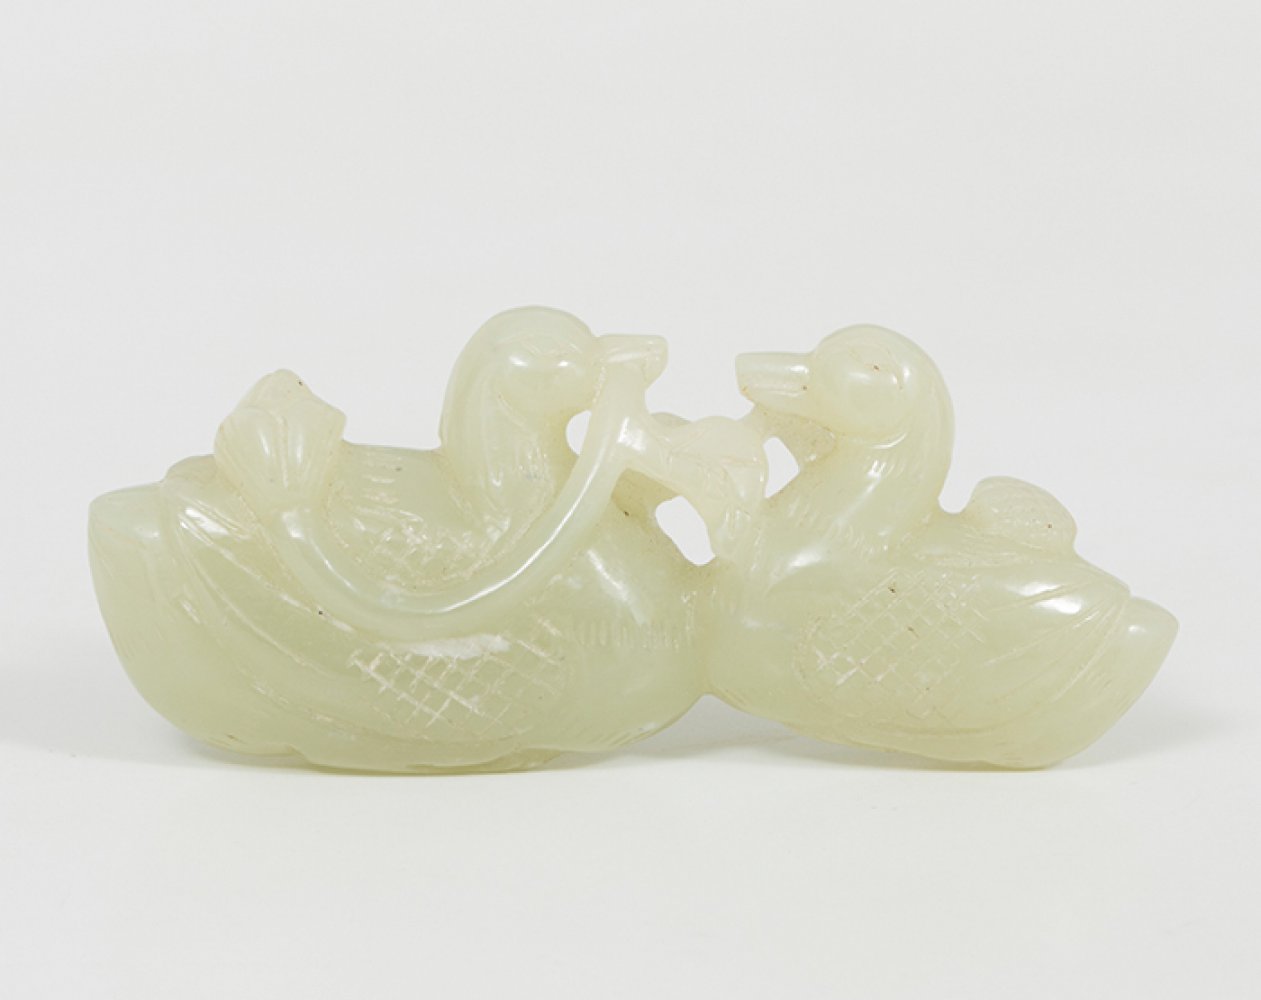 Amulet. China, Qing Dynasty, 20th century.Carved white jade.Measurements: 3.5 x 8 x 1.5 cm.Amulet